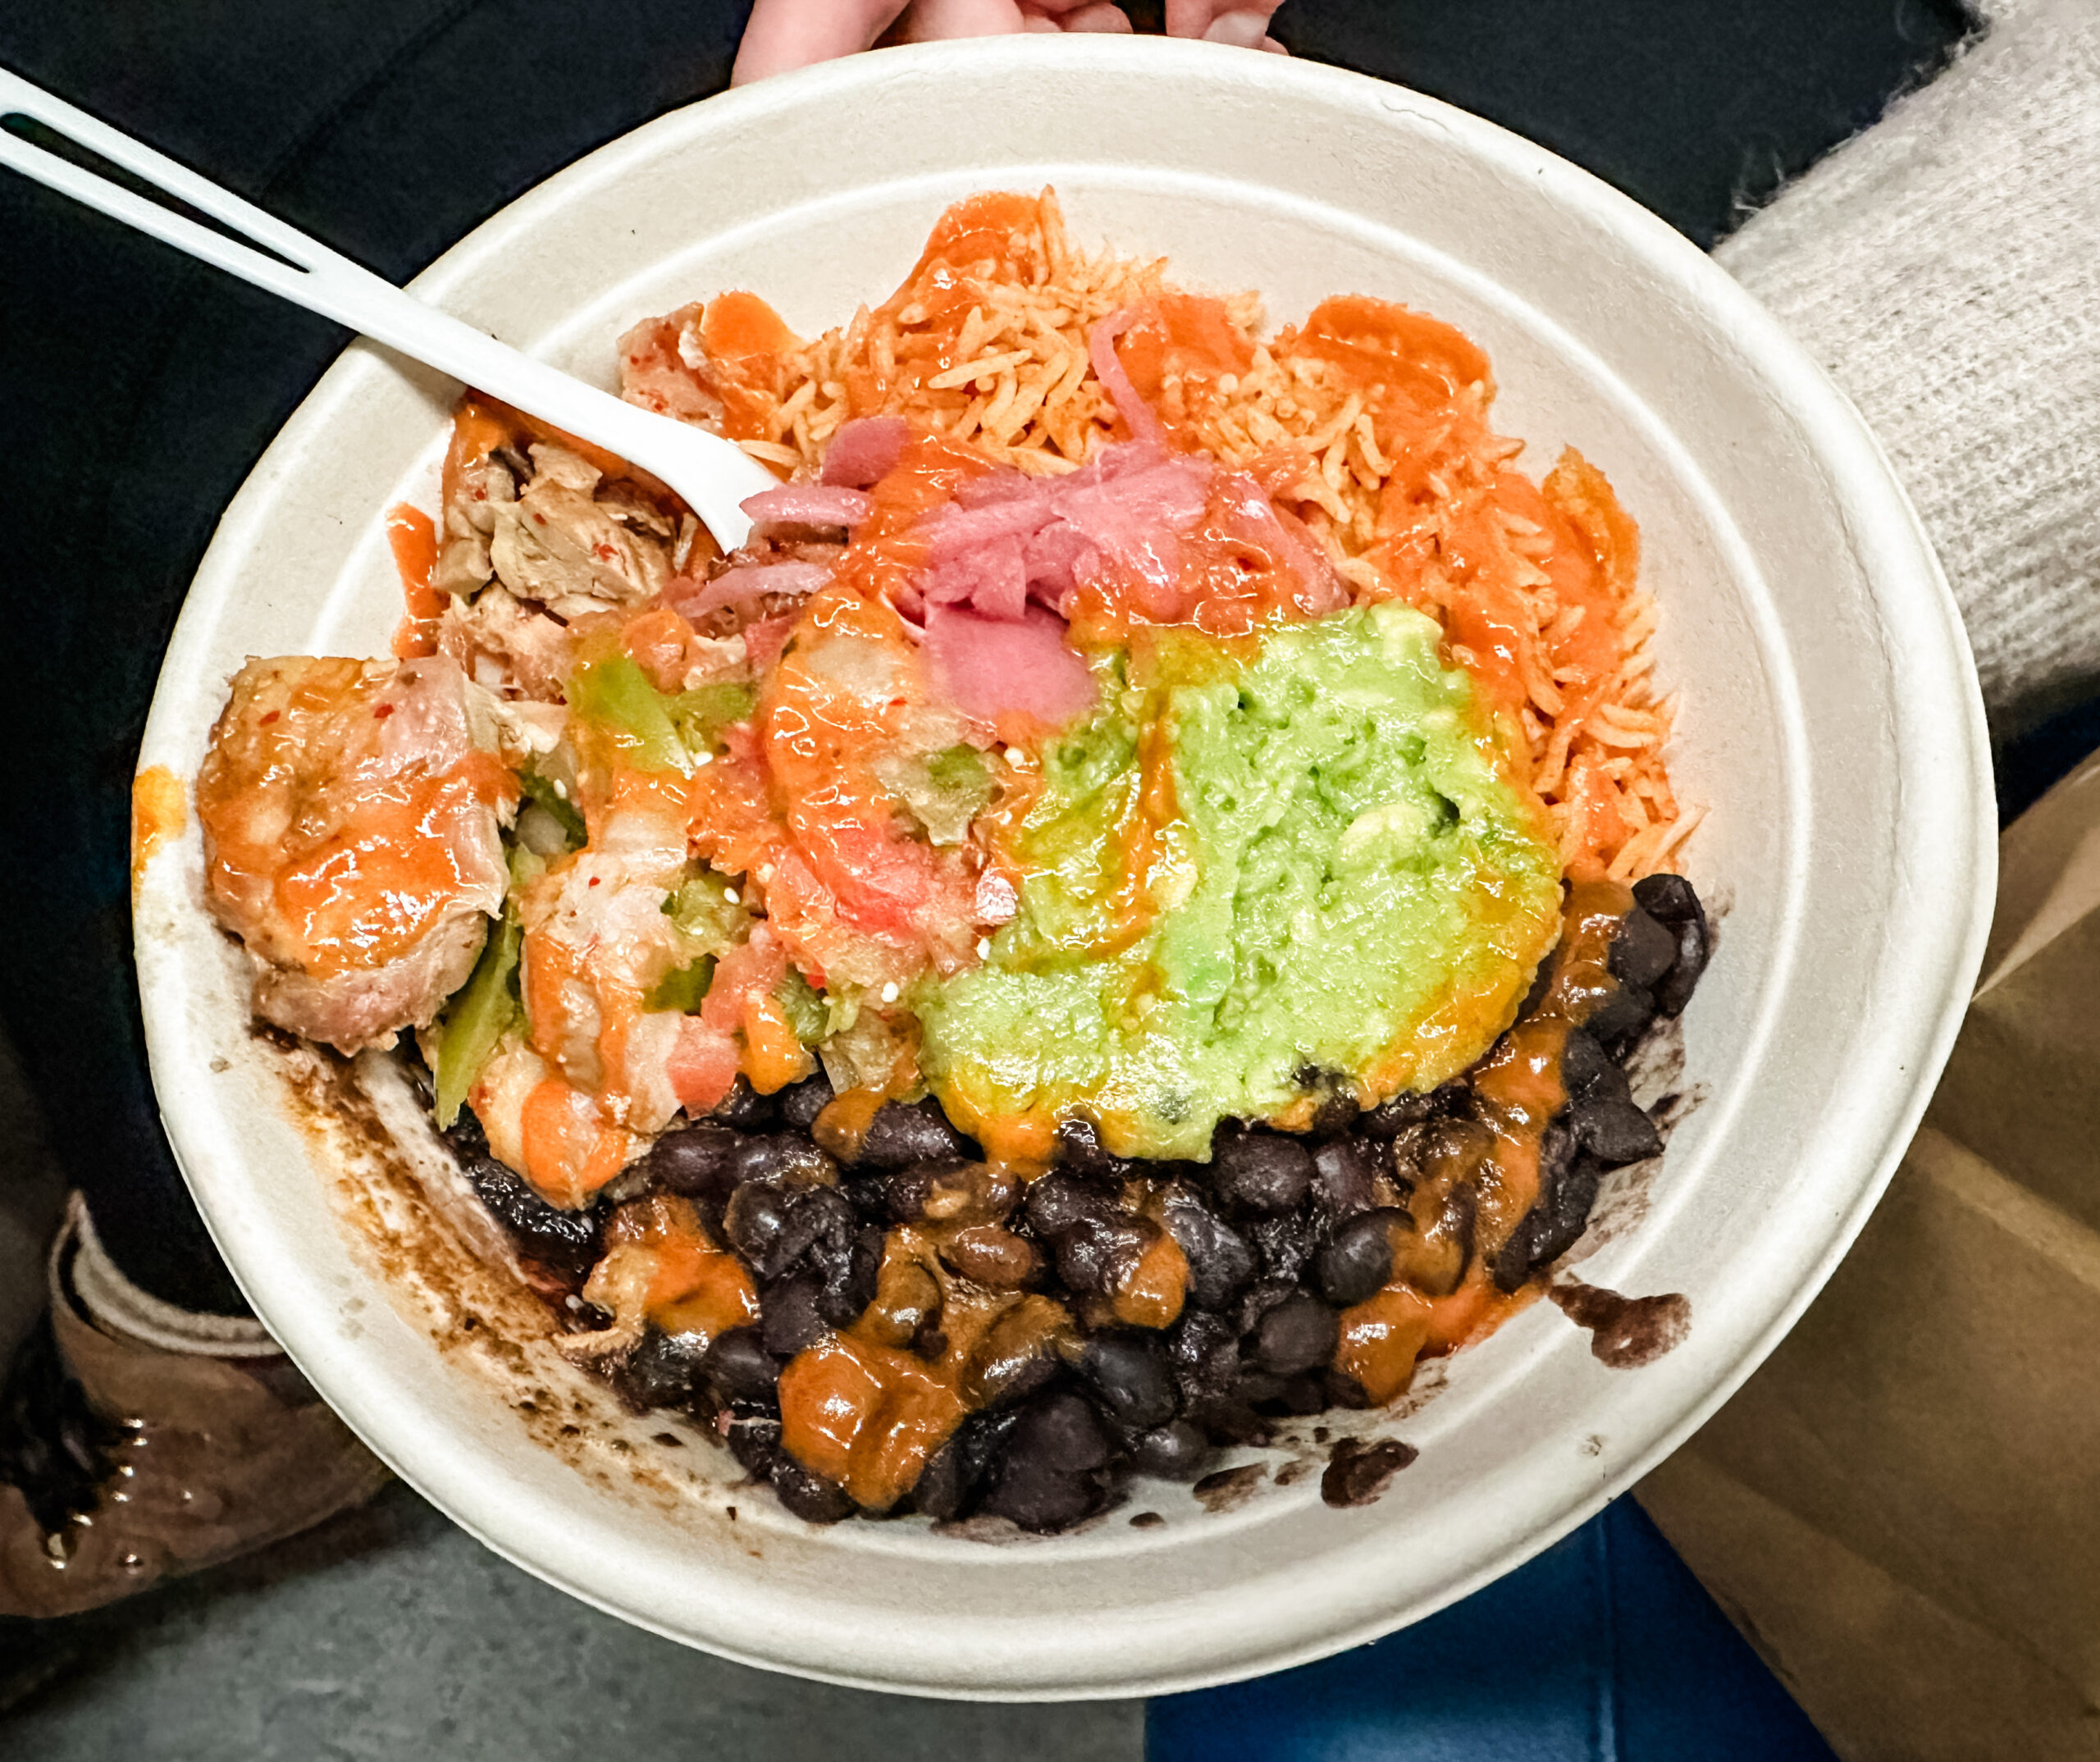 Gluten Free Mexican Bowl from Springbone Kitchen in NYC, made with free-range chicken, spanish bone broth rice, black beans, guacamole, pico de gallo, pickled onion and hot sauce